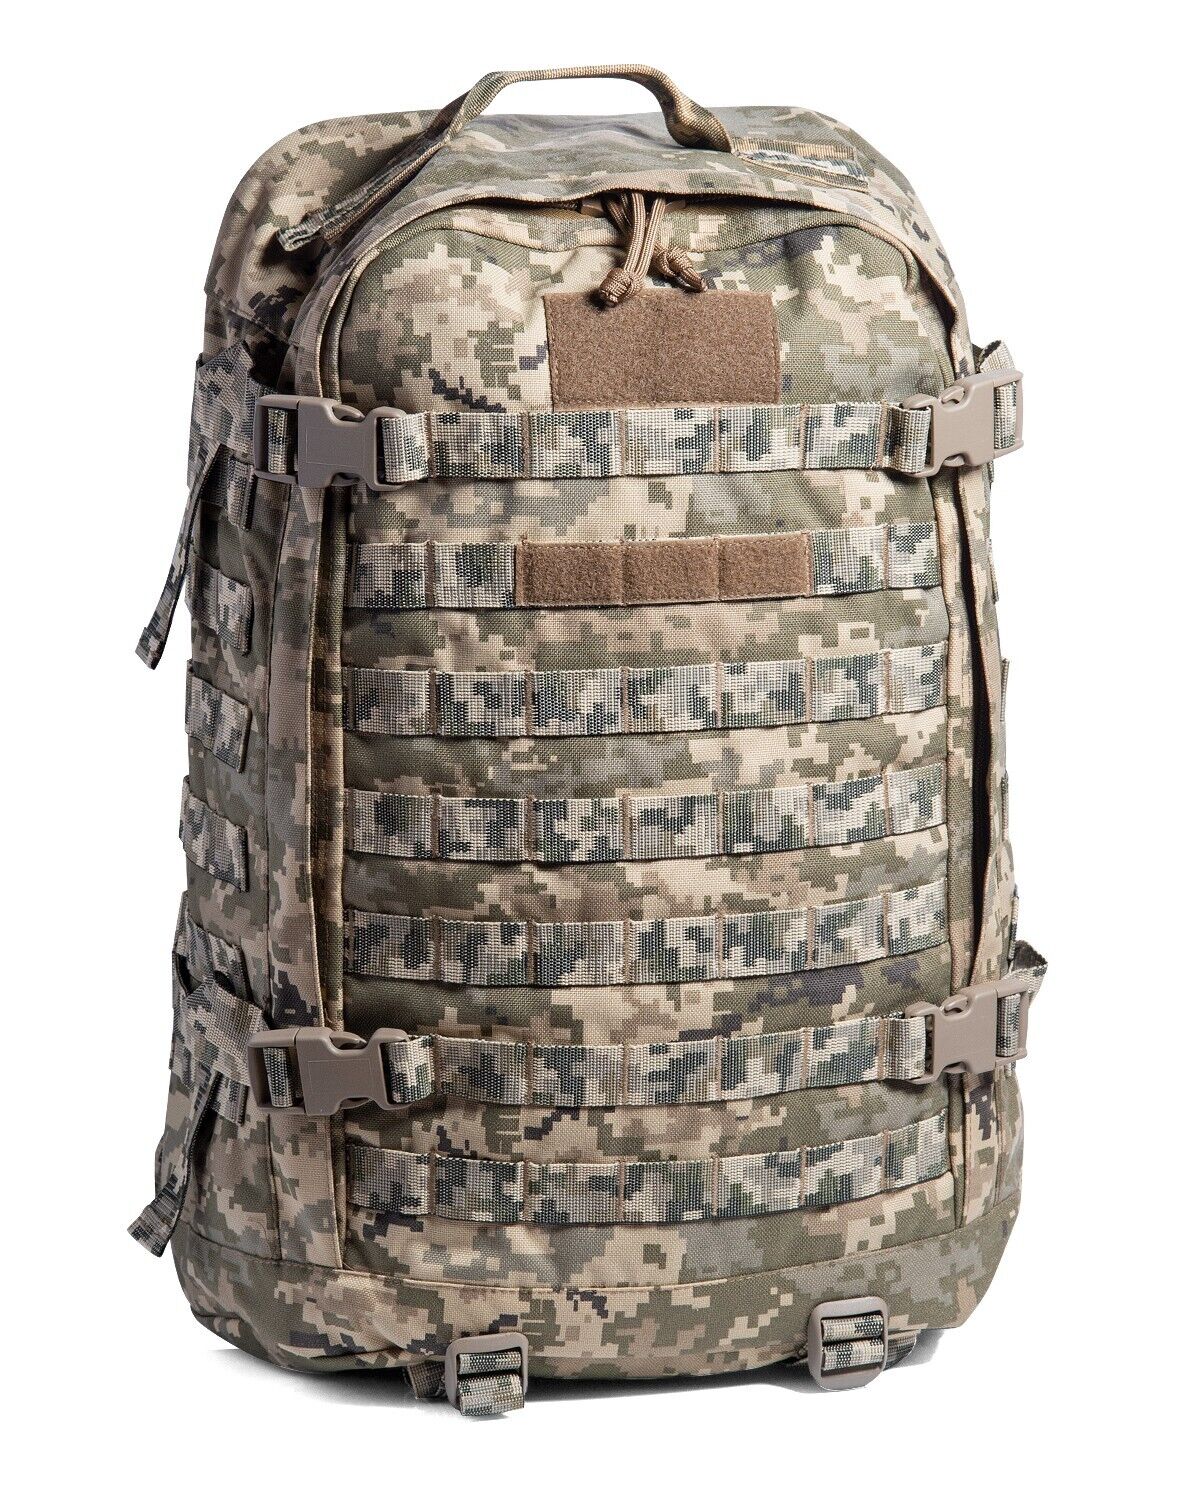 Individual combat backpack of a Ukrainian soldier